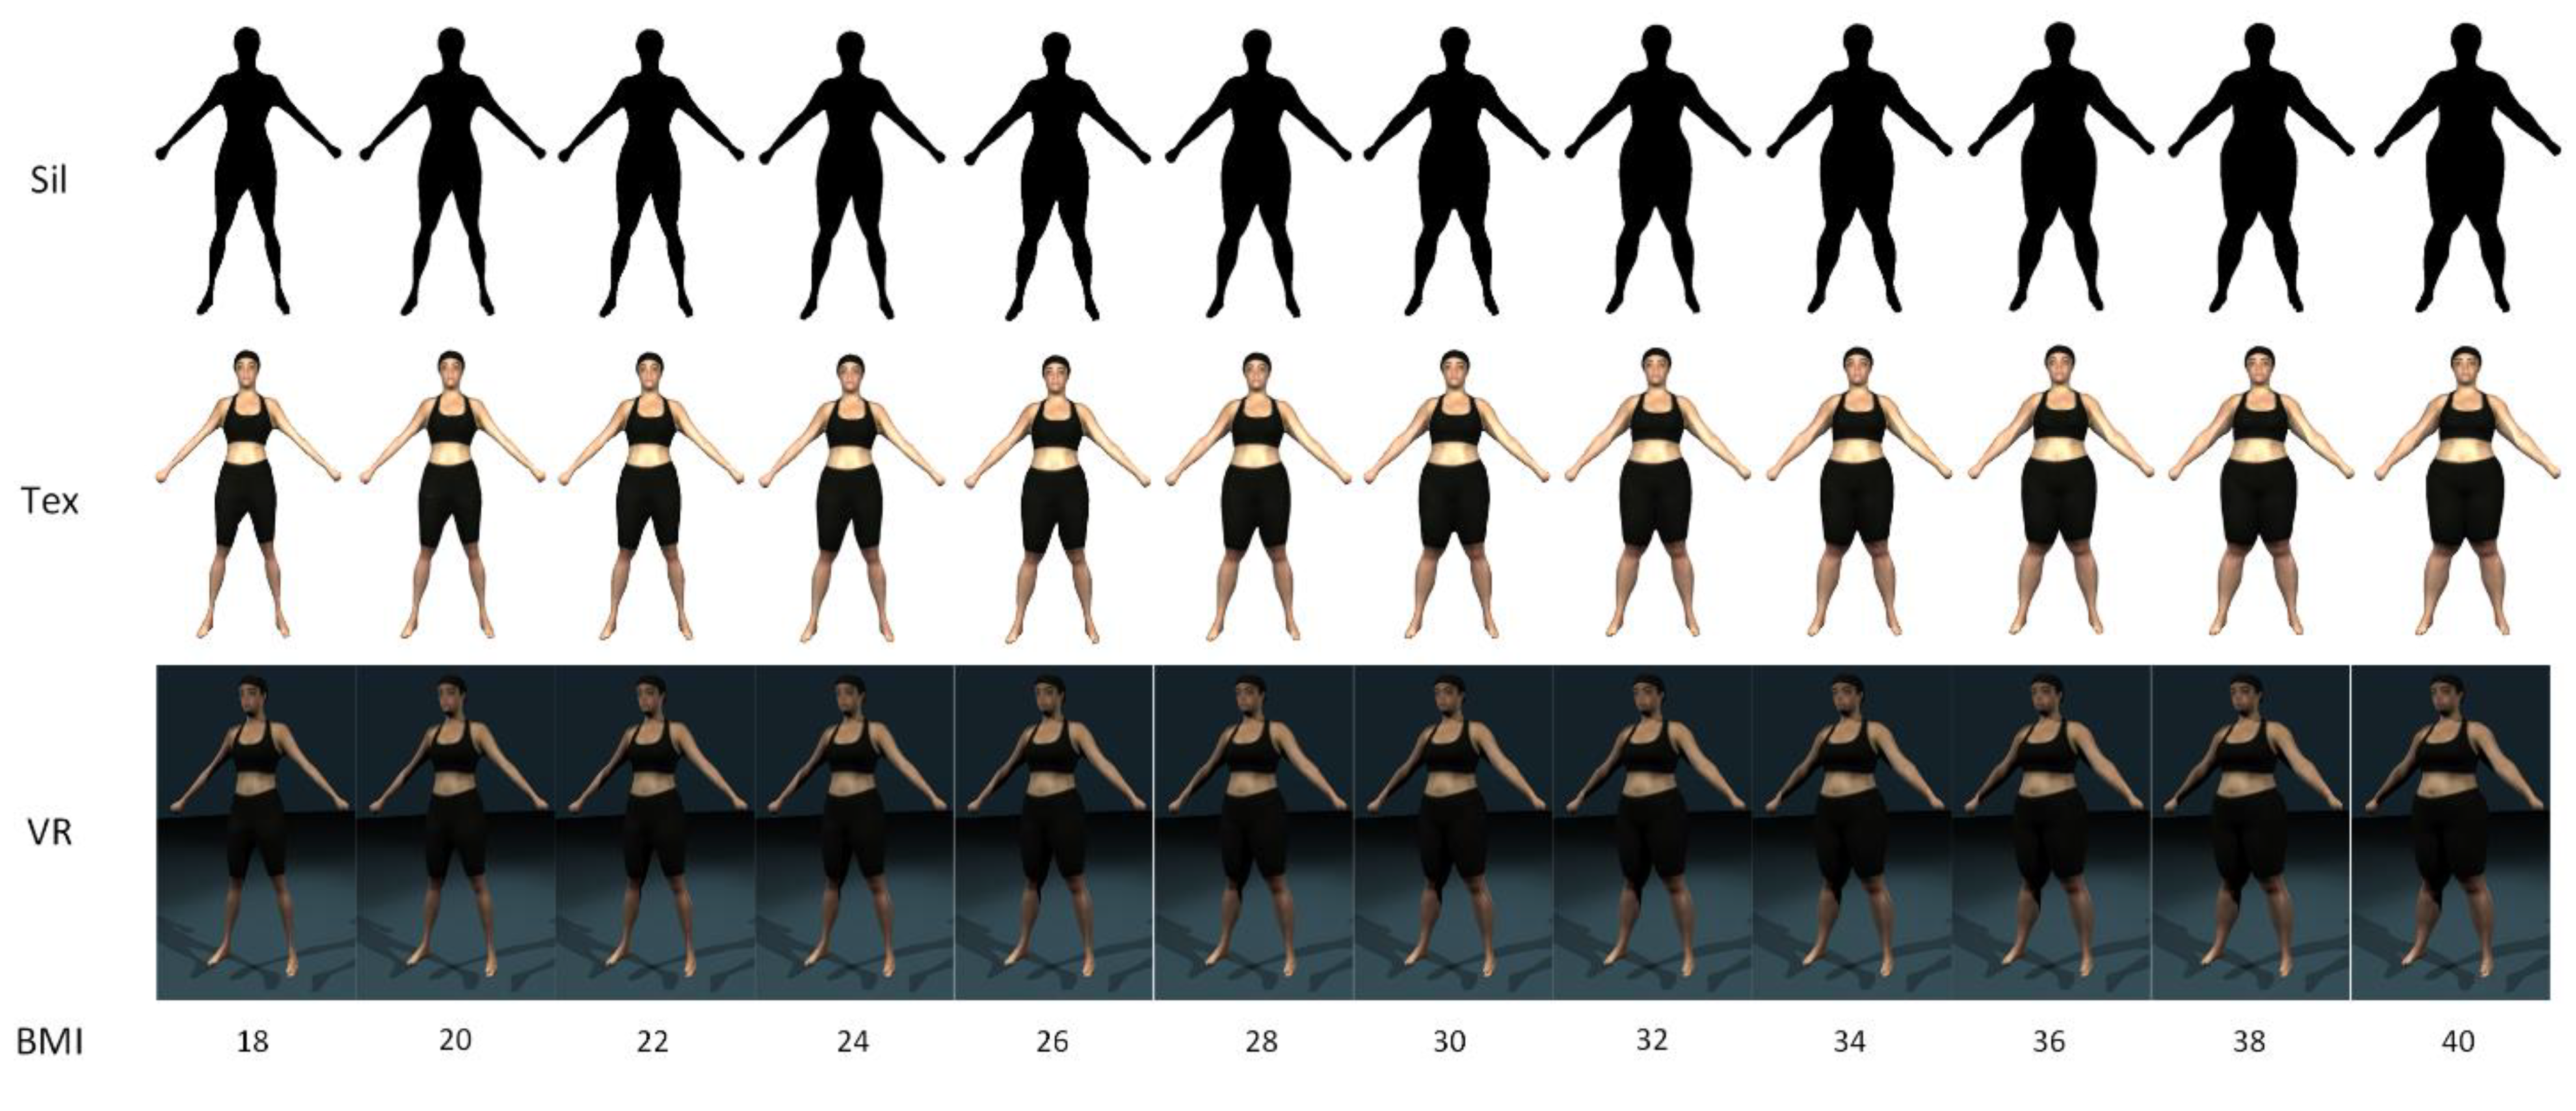 EJIHPE | Free Full-Text | The Development of a BMI-Guided Shape Morphing  Technique and the Effects of an Individualized Figure Rating Scale on  Self-Perception of Body Size | HTML